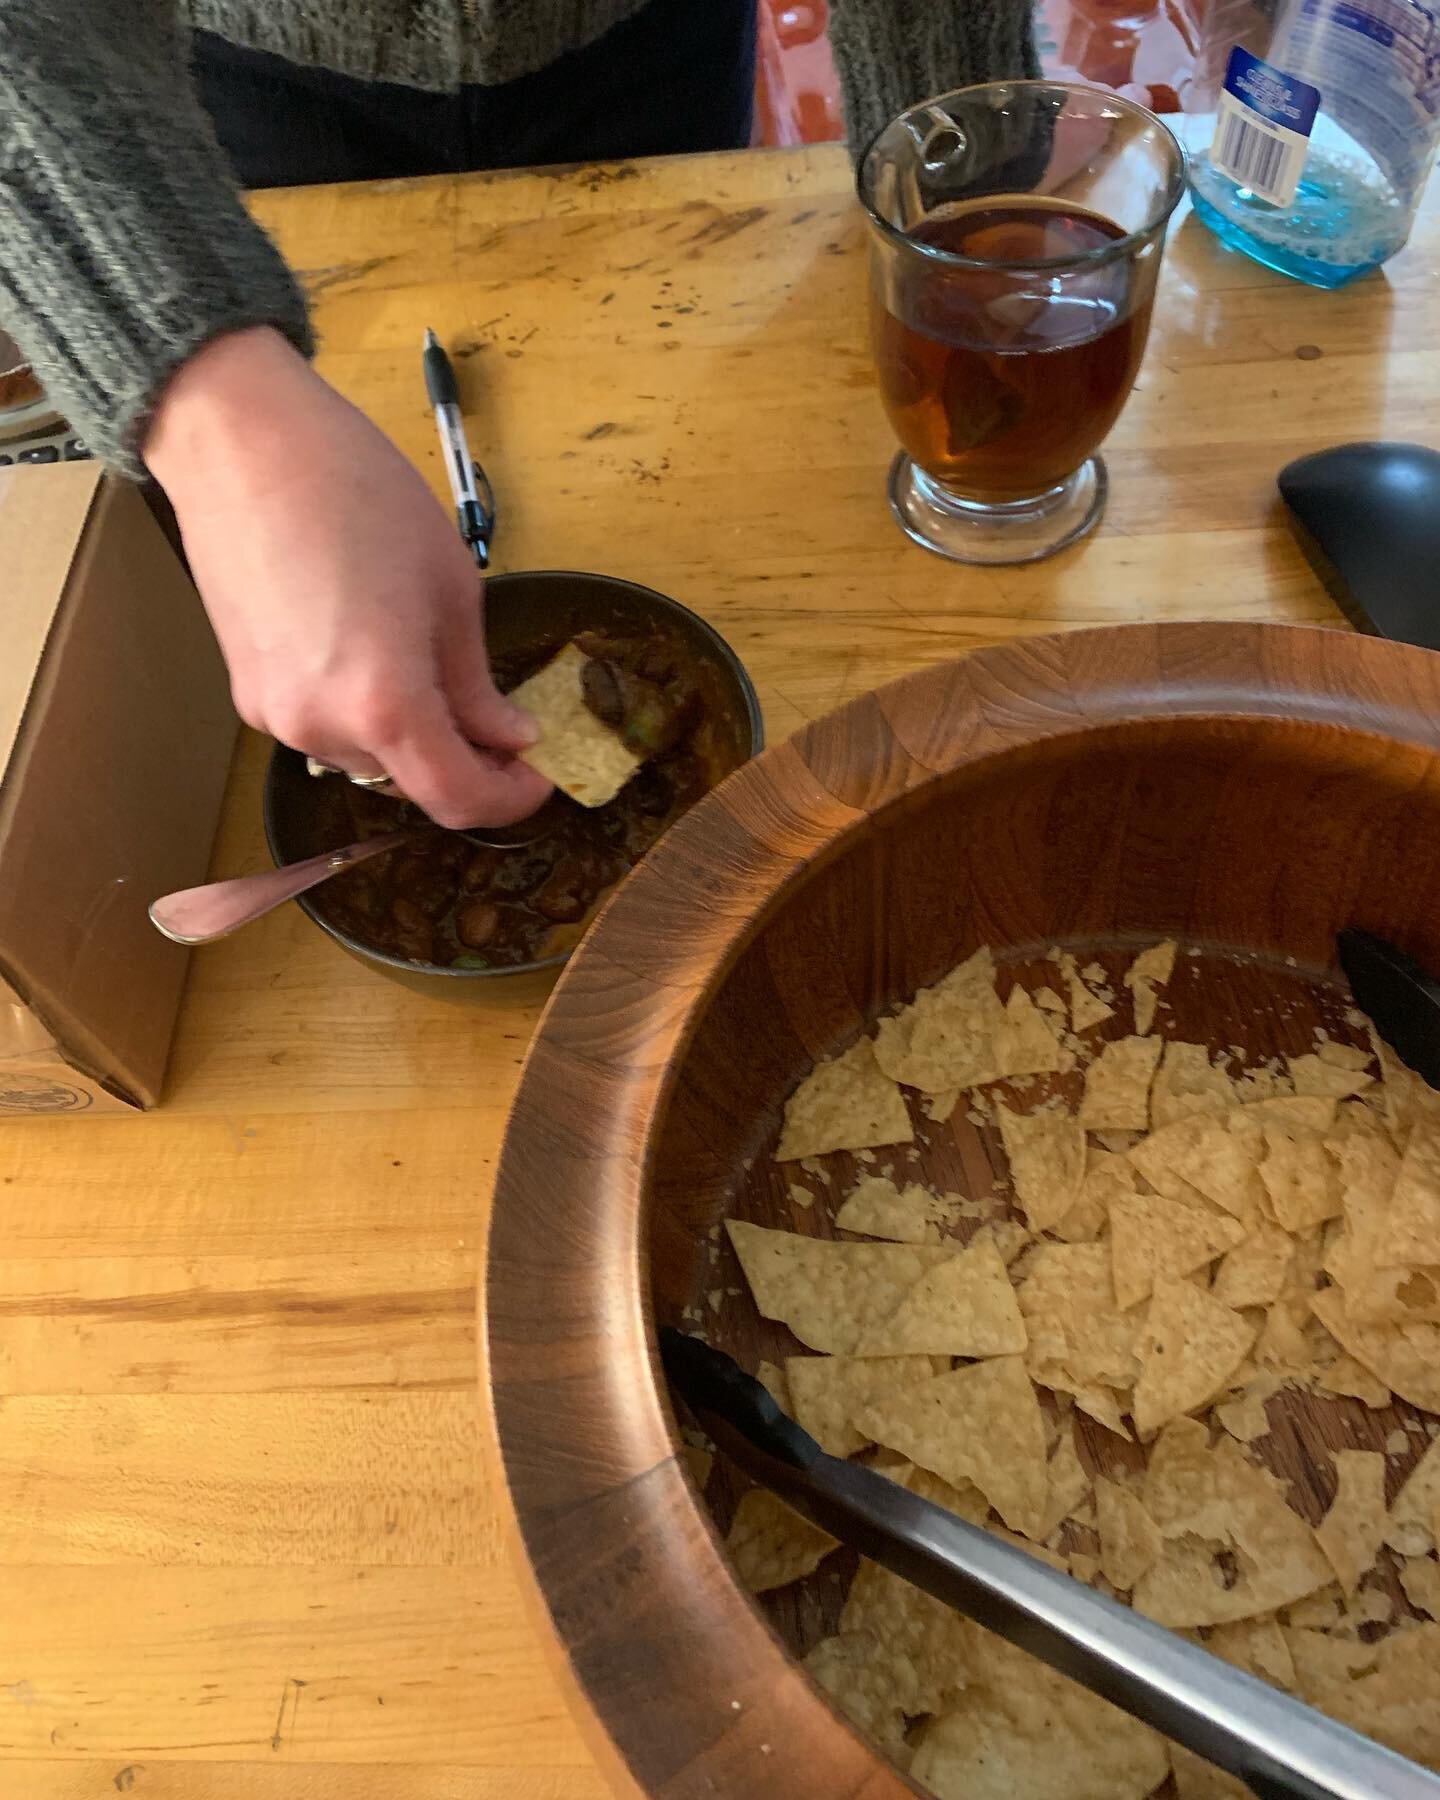 And the last bowl is for us! Thanks to everyone who came out today, chili is gone but we&rsquo;re here till 6 o&rsquo;clock. #smallbusinesssaturday #genevany #morganlaurent #flx